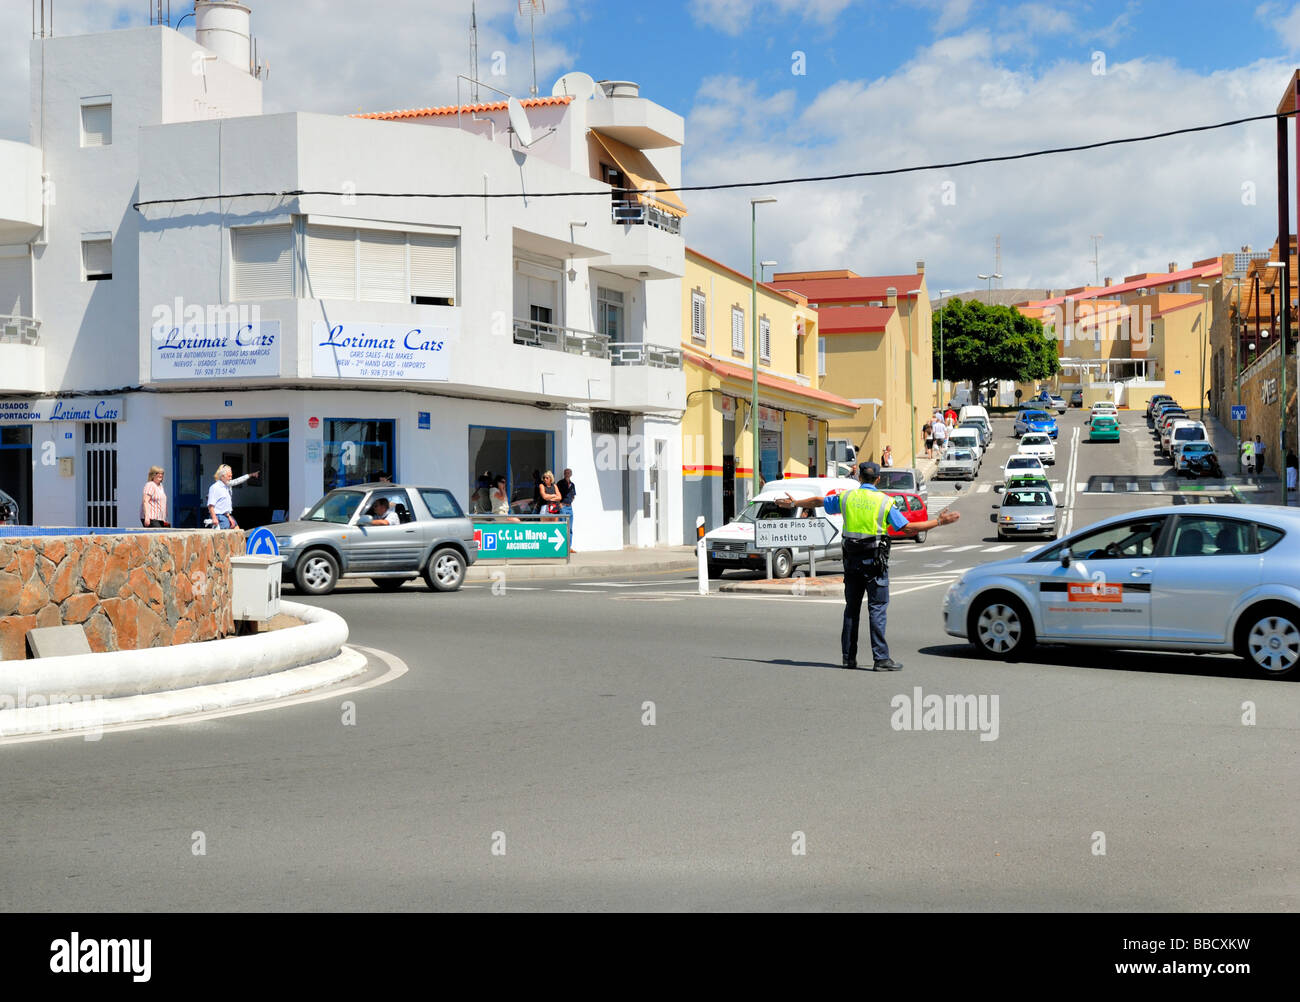 A fine to the traffic roundabout of the small coastal village of Arguineguin, Gran Canaria, Canary Islands, Spain, Europe. Stock Photo